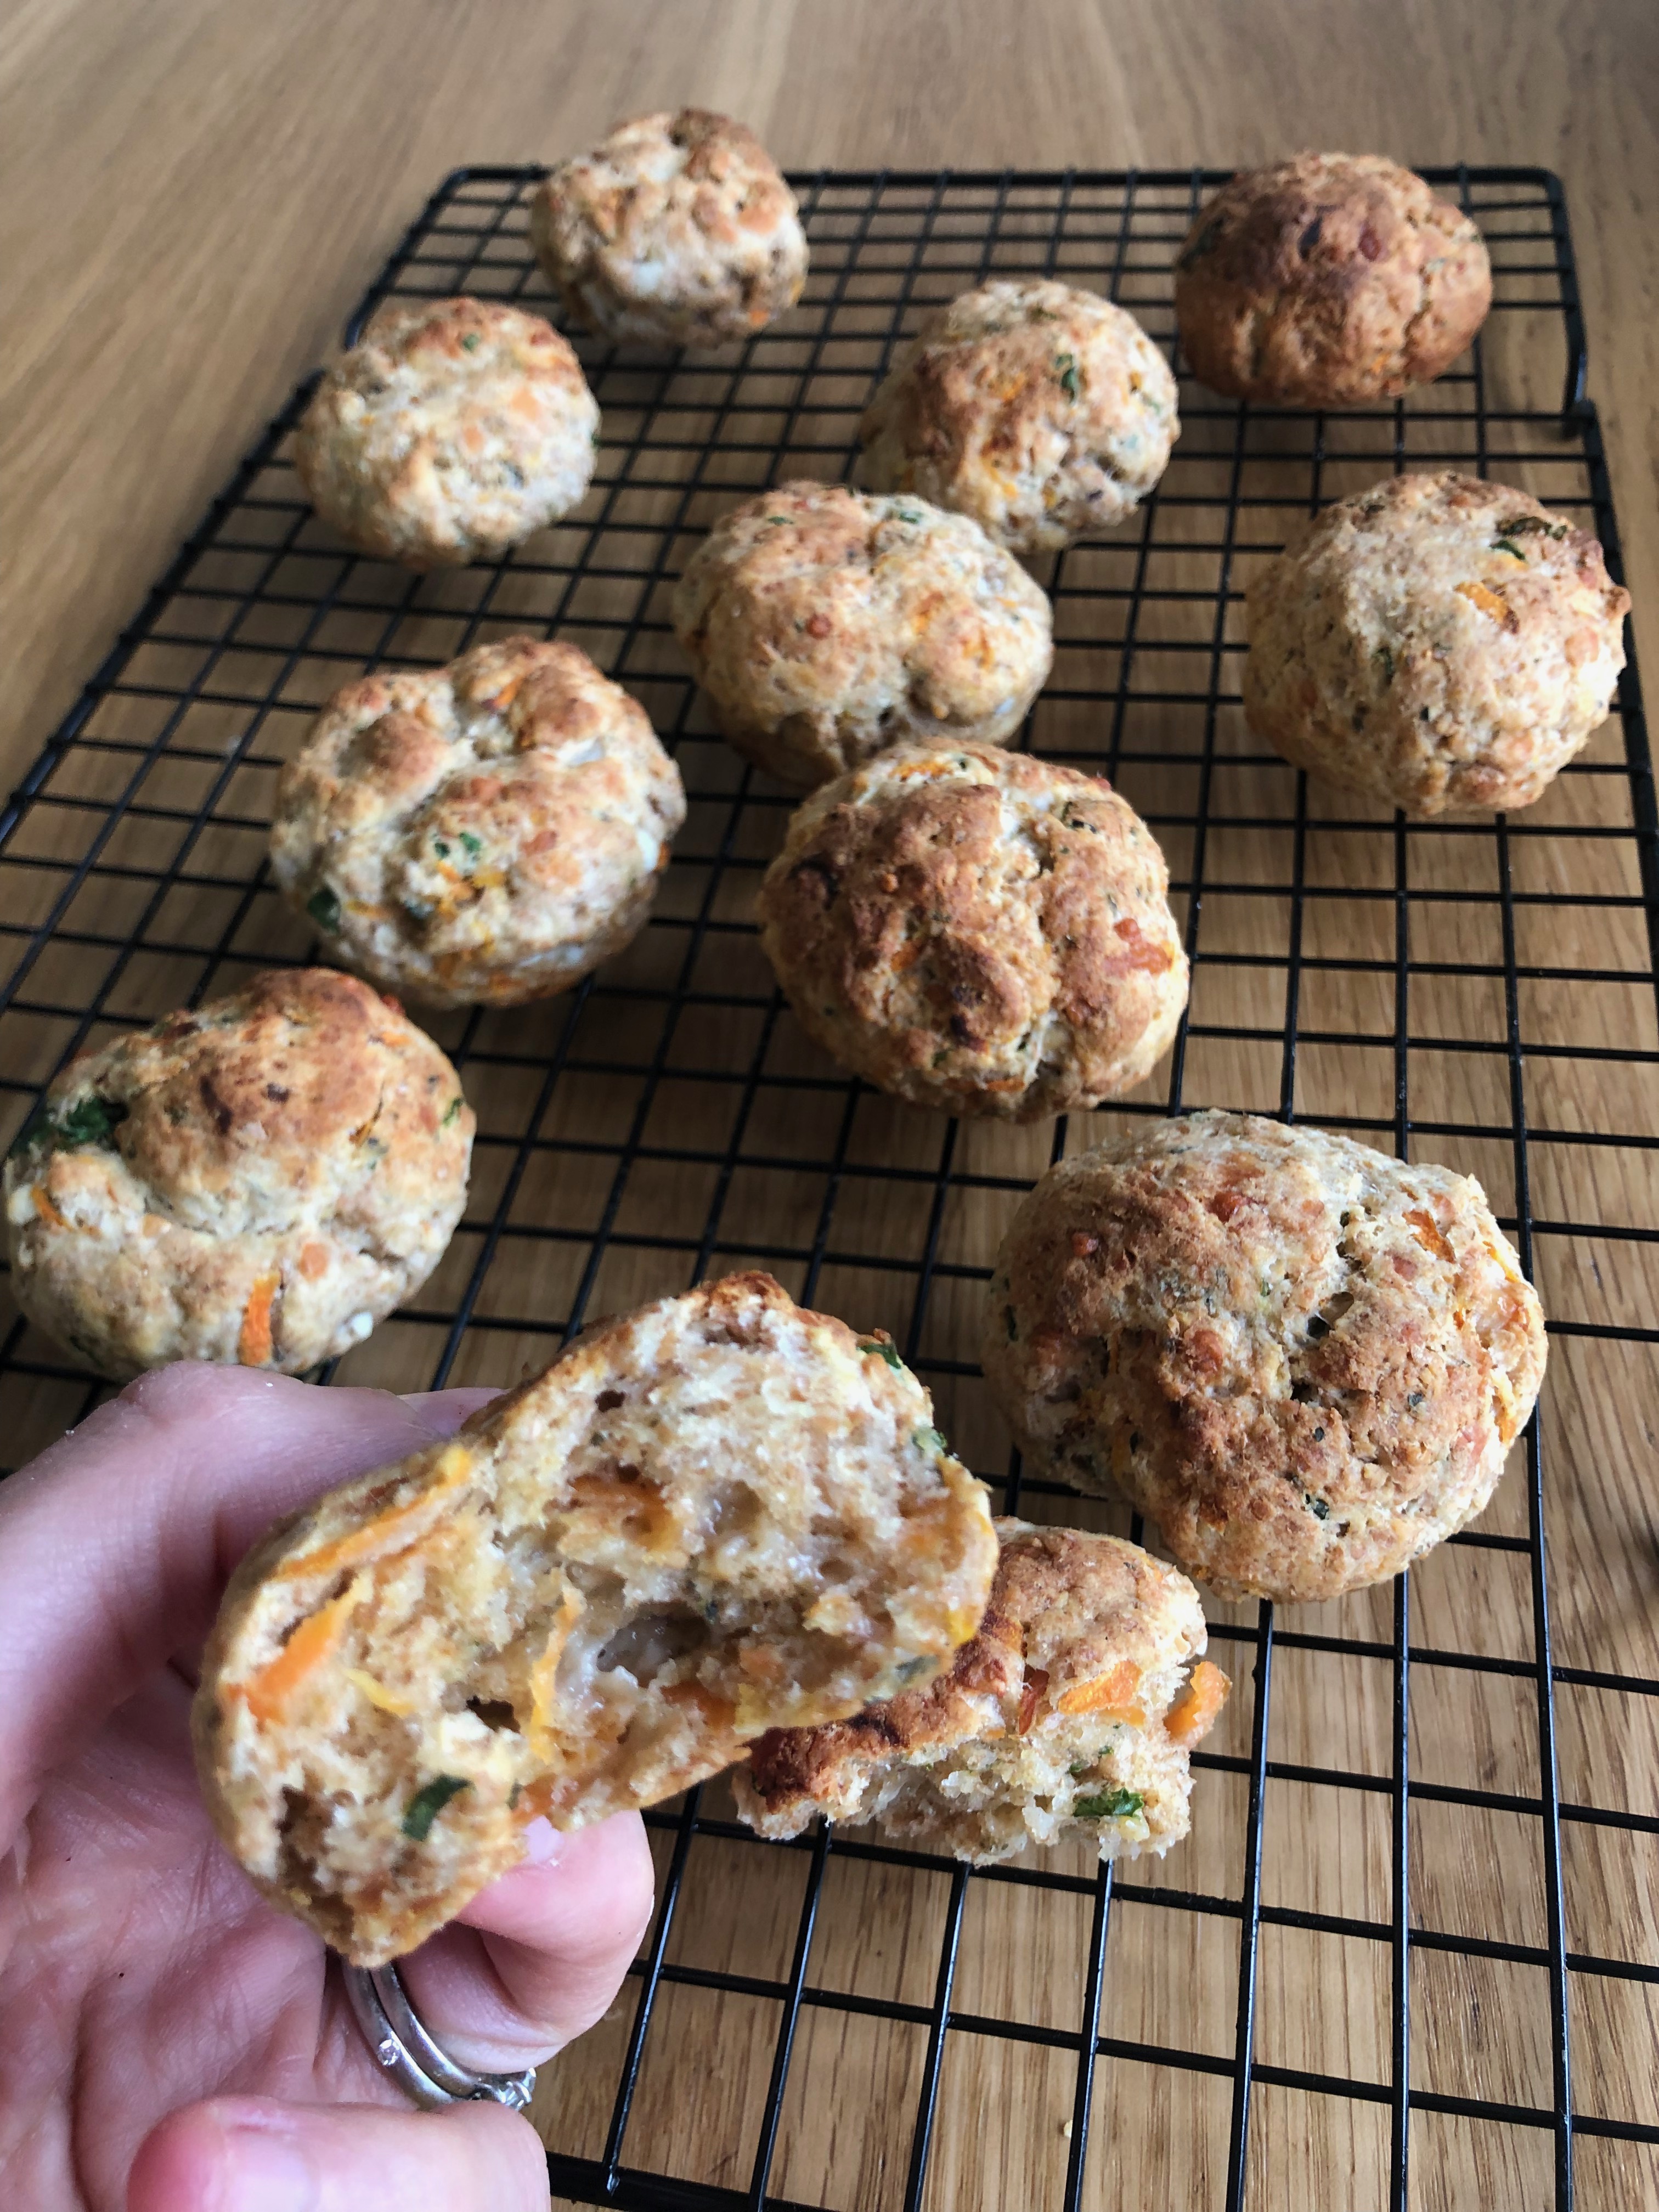 Carrot, Kale & Cheese Scones